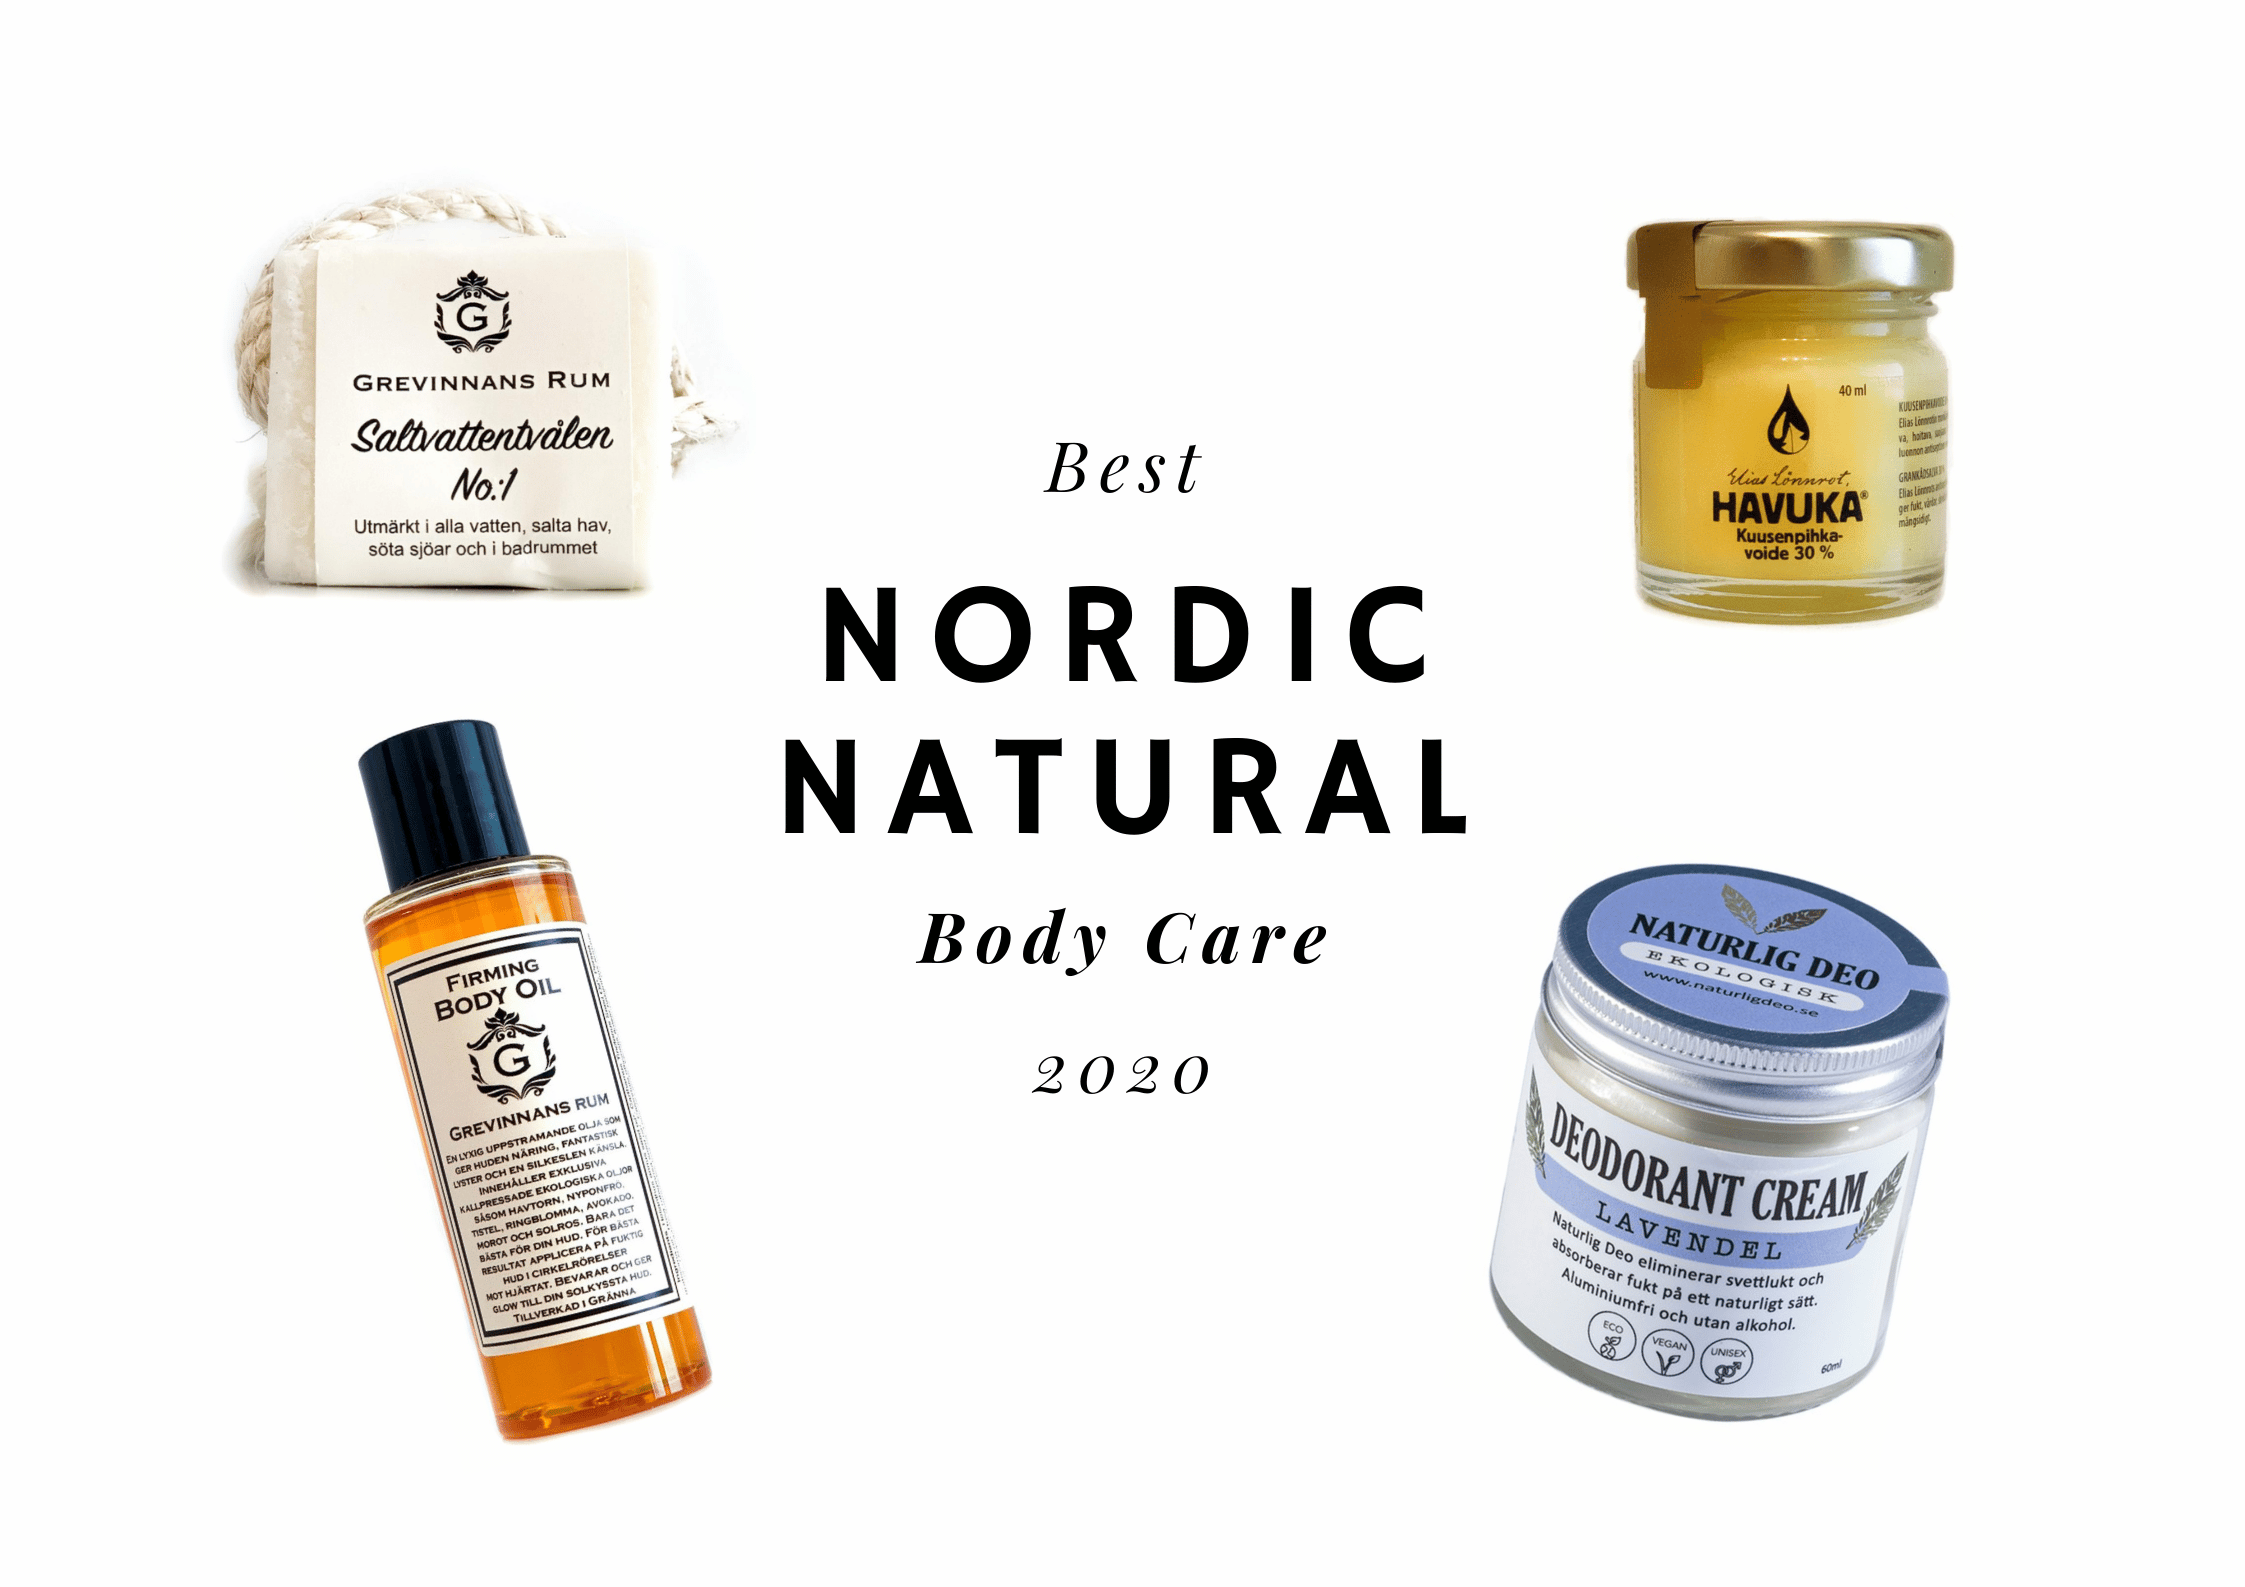 Nordic-natural-beauty-awards-body-care-winners-2020